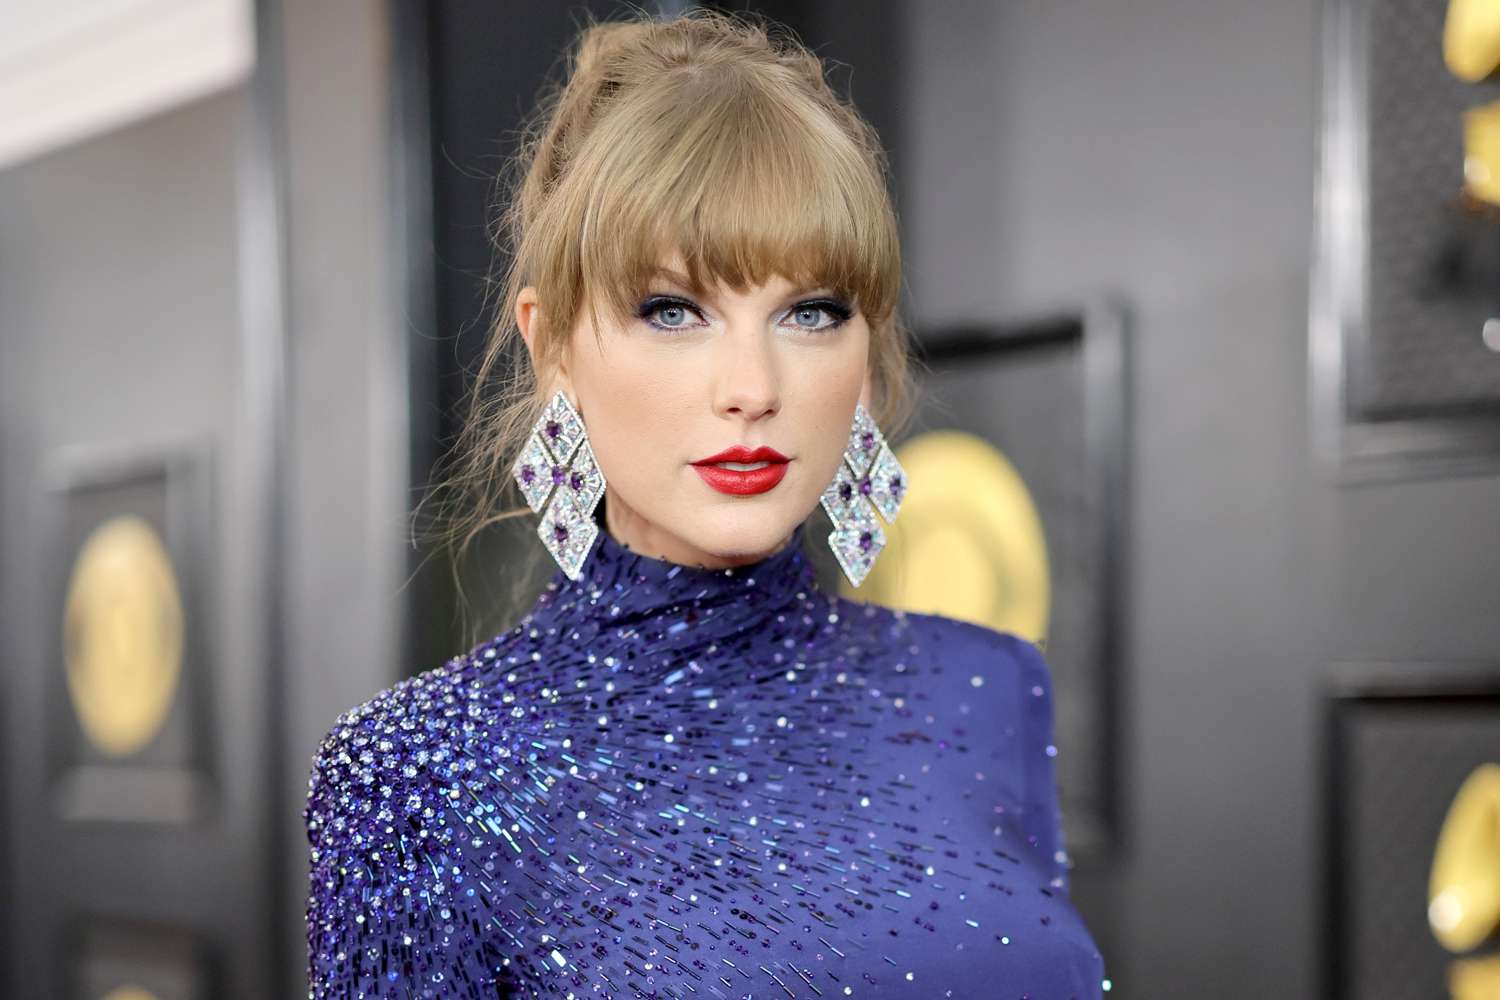 Taylor Swift Unsearchable On X Following AI-Image Issues